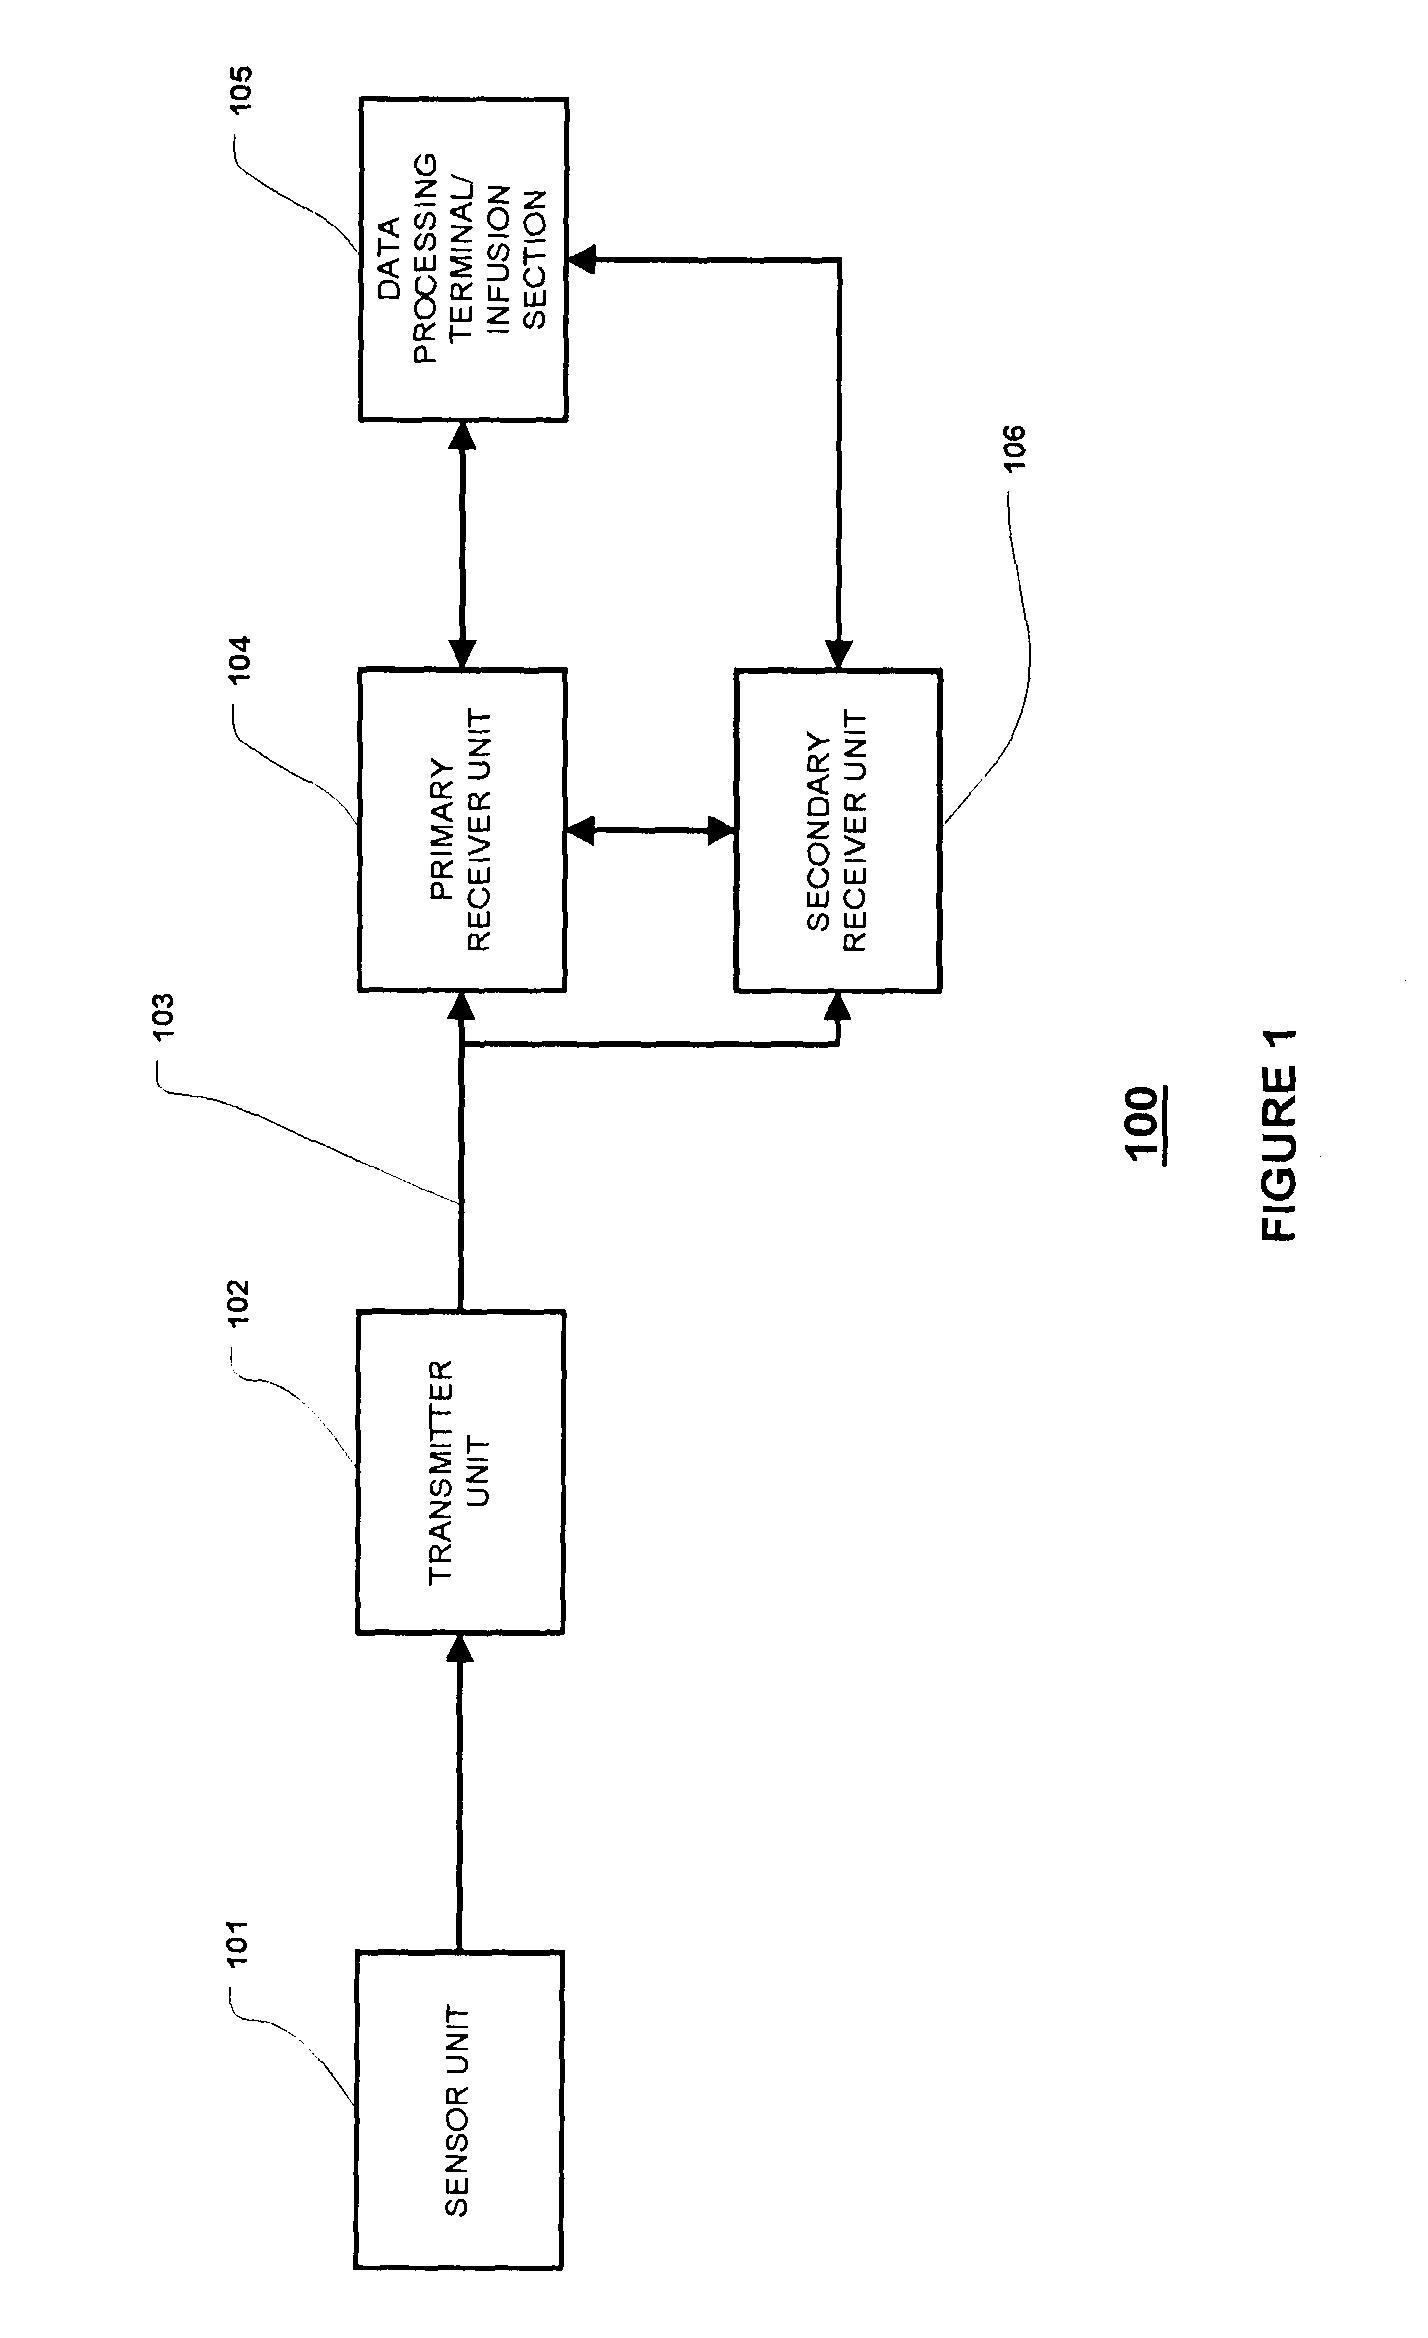 Method and apparatus for providing rolling data in communication systems